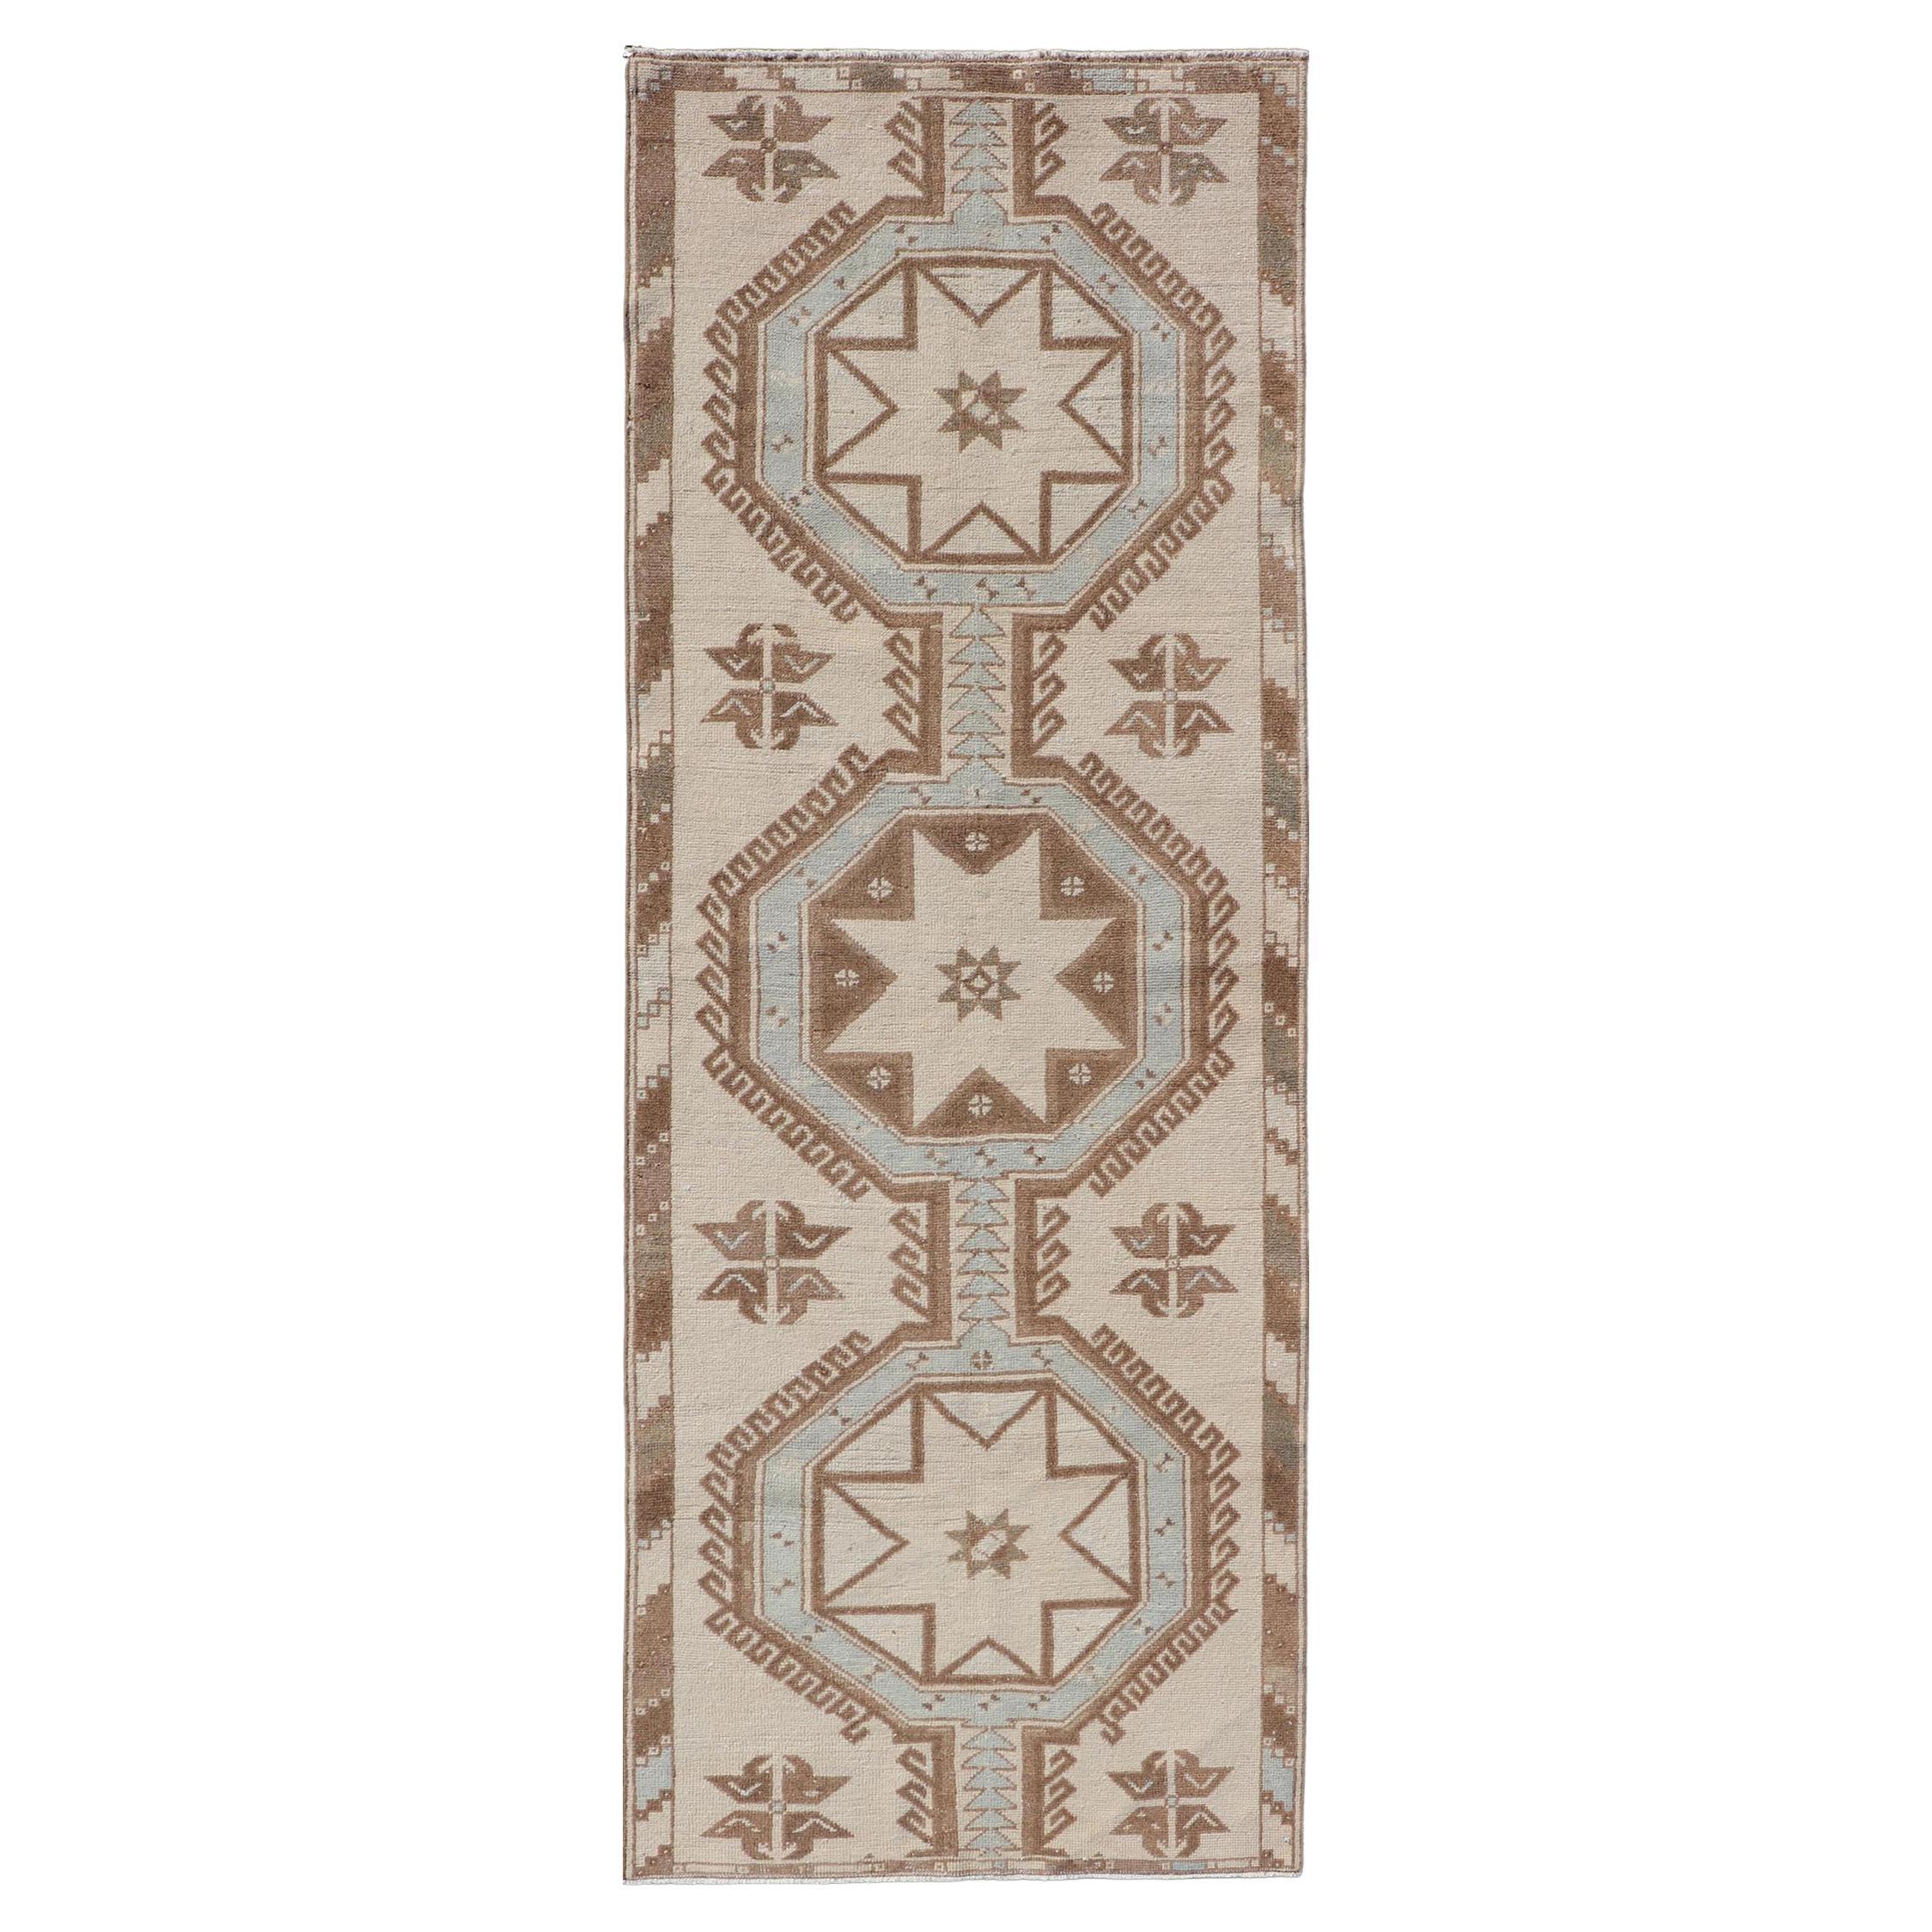 Vintage Turkish Oushak Runner with Geometric Medallions in Neutral Earth Colors